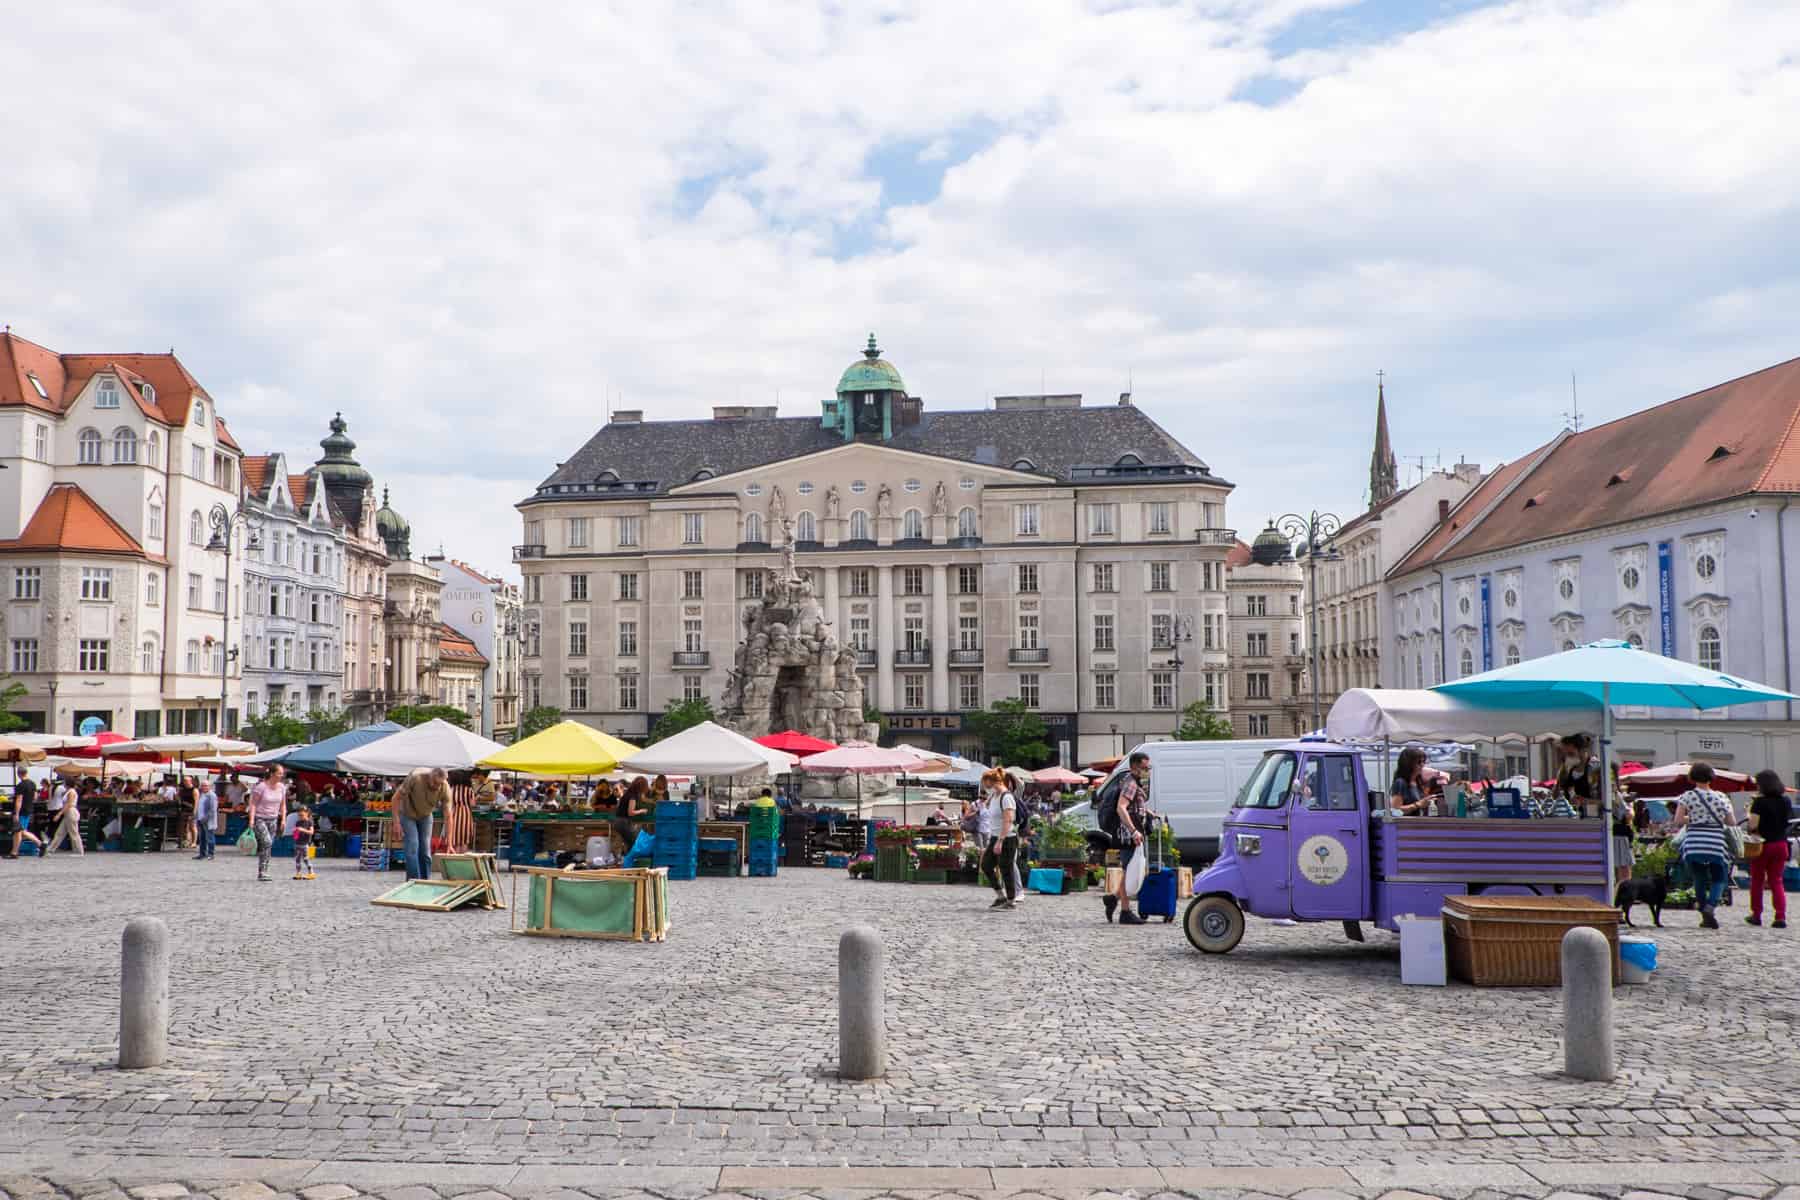 A purple ice cream truck and stalls with umbrellas in rainbow colours fill the Vegetable Market square in Brno surrounded by old buildings.